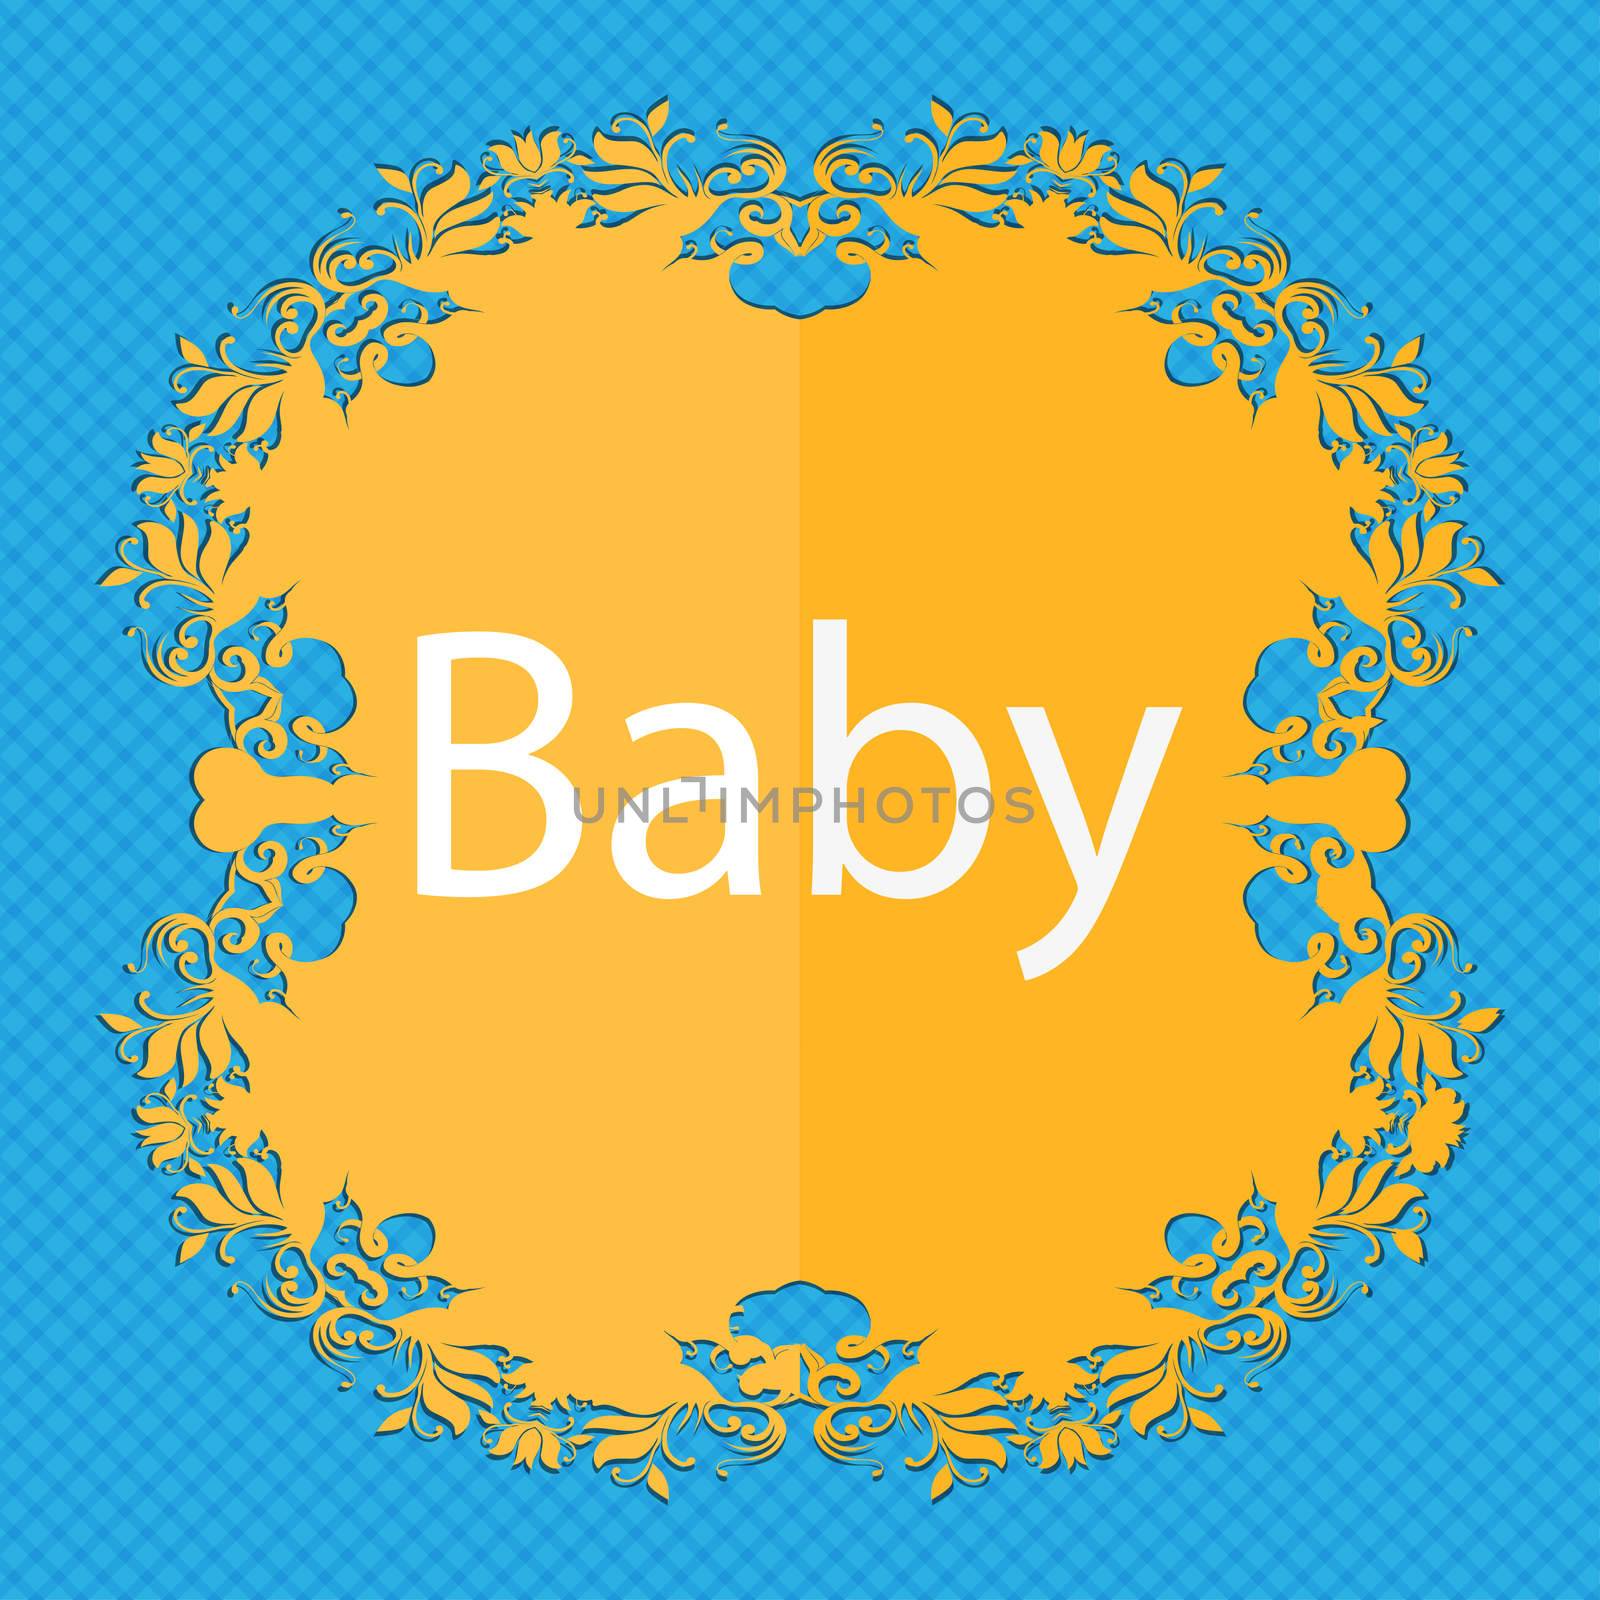 Baby on board sign icon. Infant in car caution symbol. Baby pacifier nipple. Floral flat design on a blue abstract background with place for your text. illustration